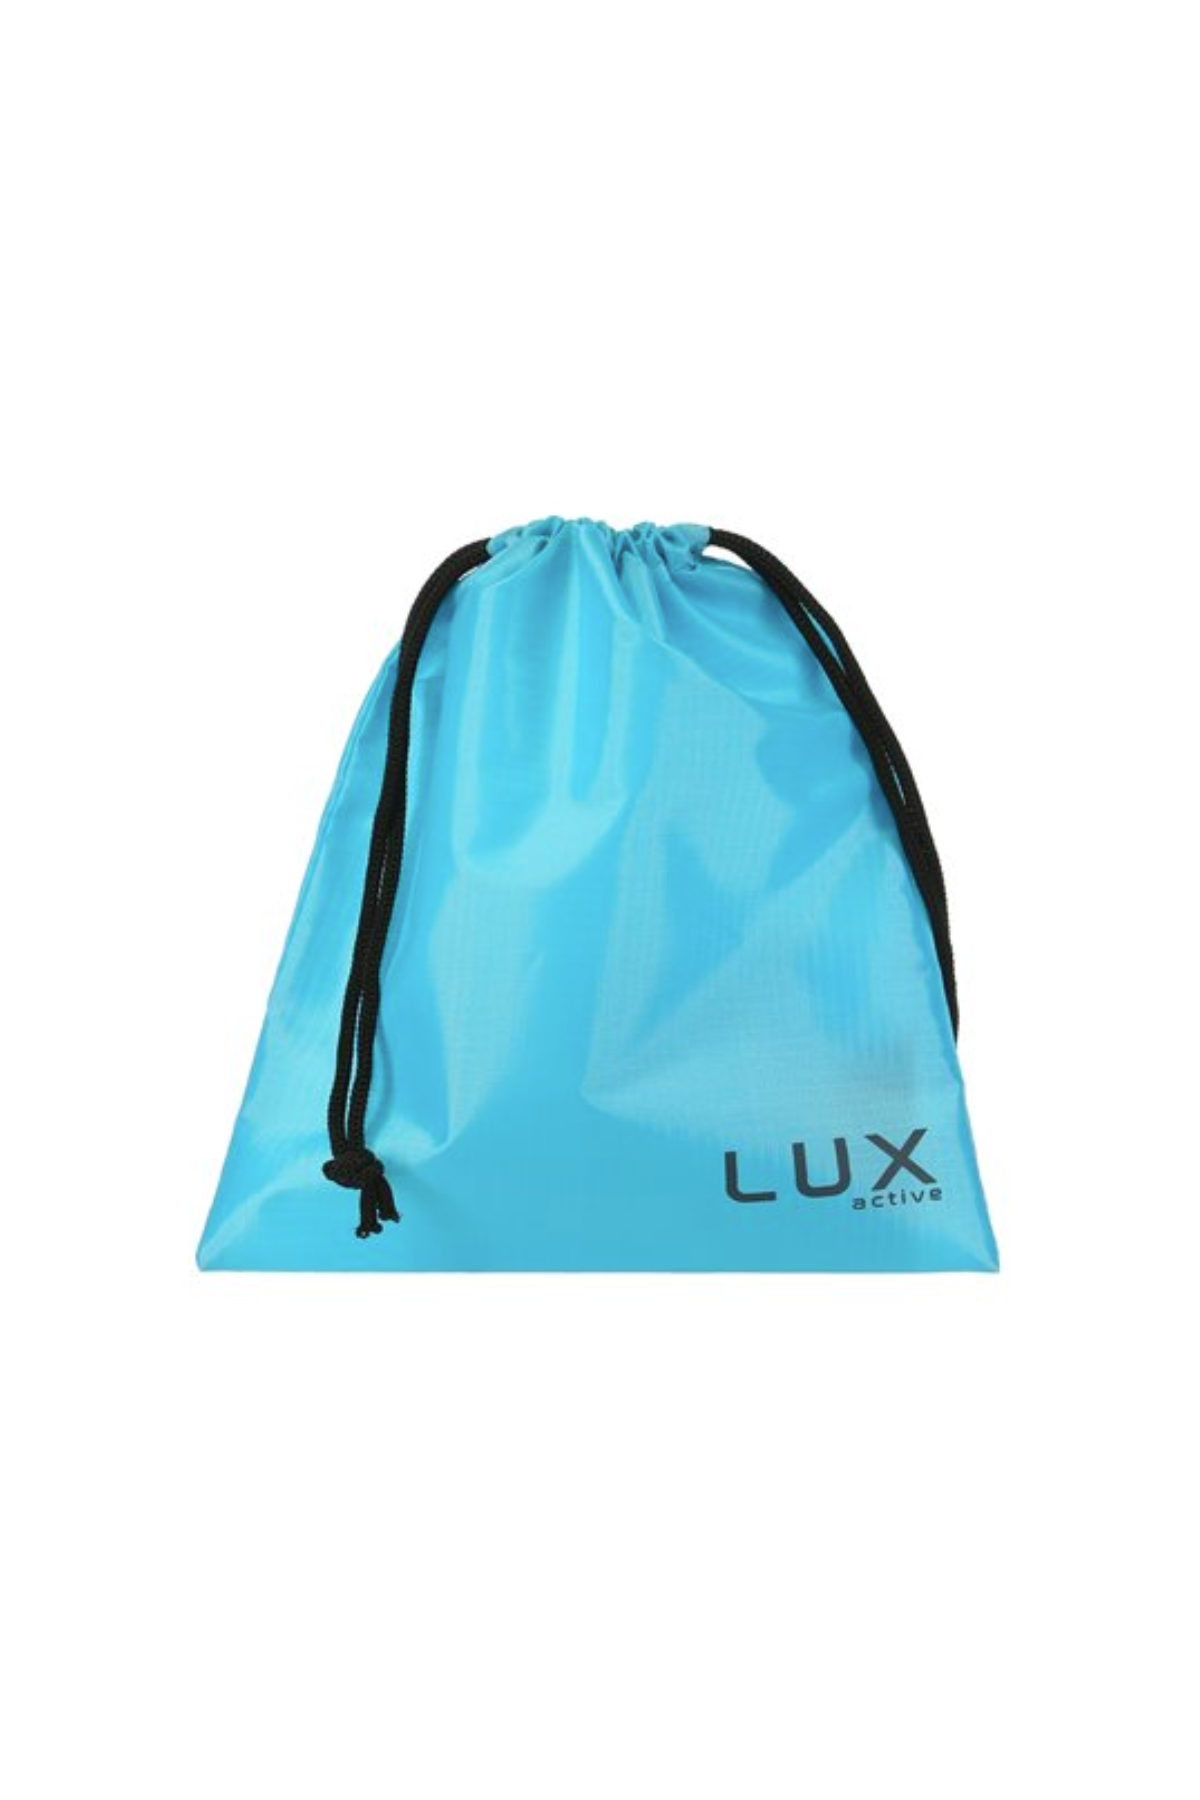 LUX active’s Equip is an Anal Training kit Bag | Matildas